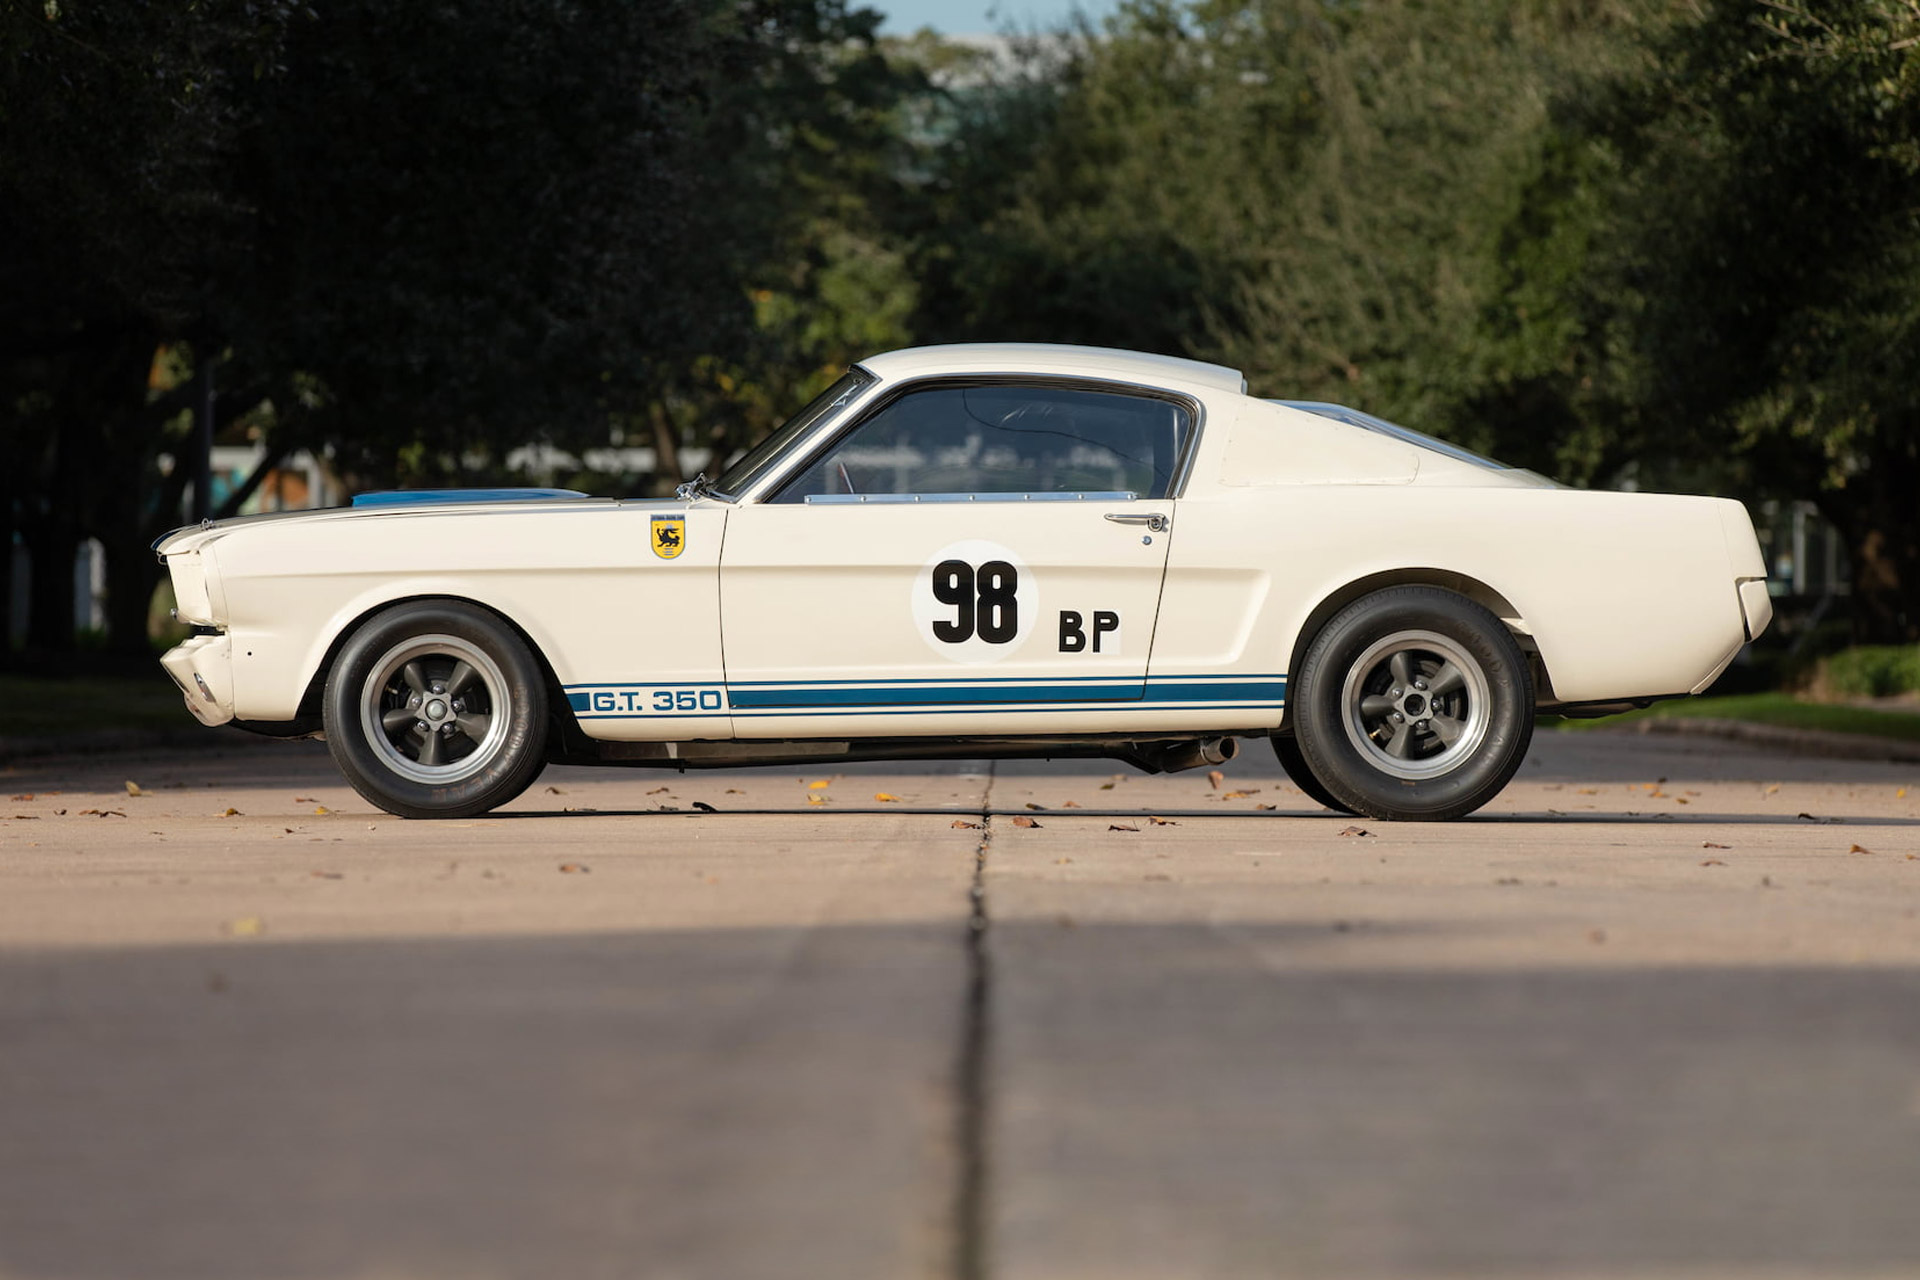 Chris' Cool Cars: Ken Miles' “Flying” Shelby Mustang GT350R Prototype | Detailing Success